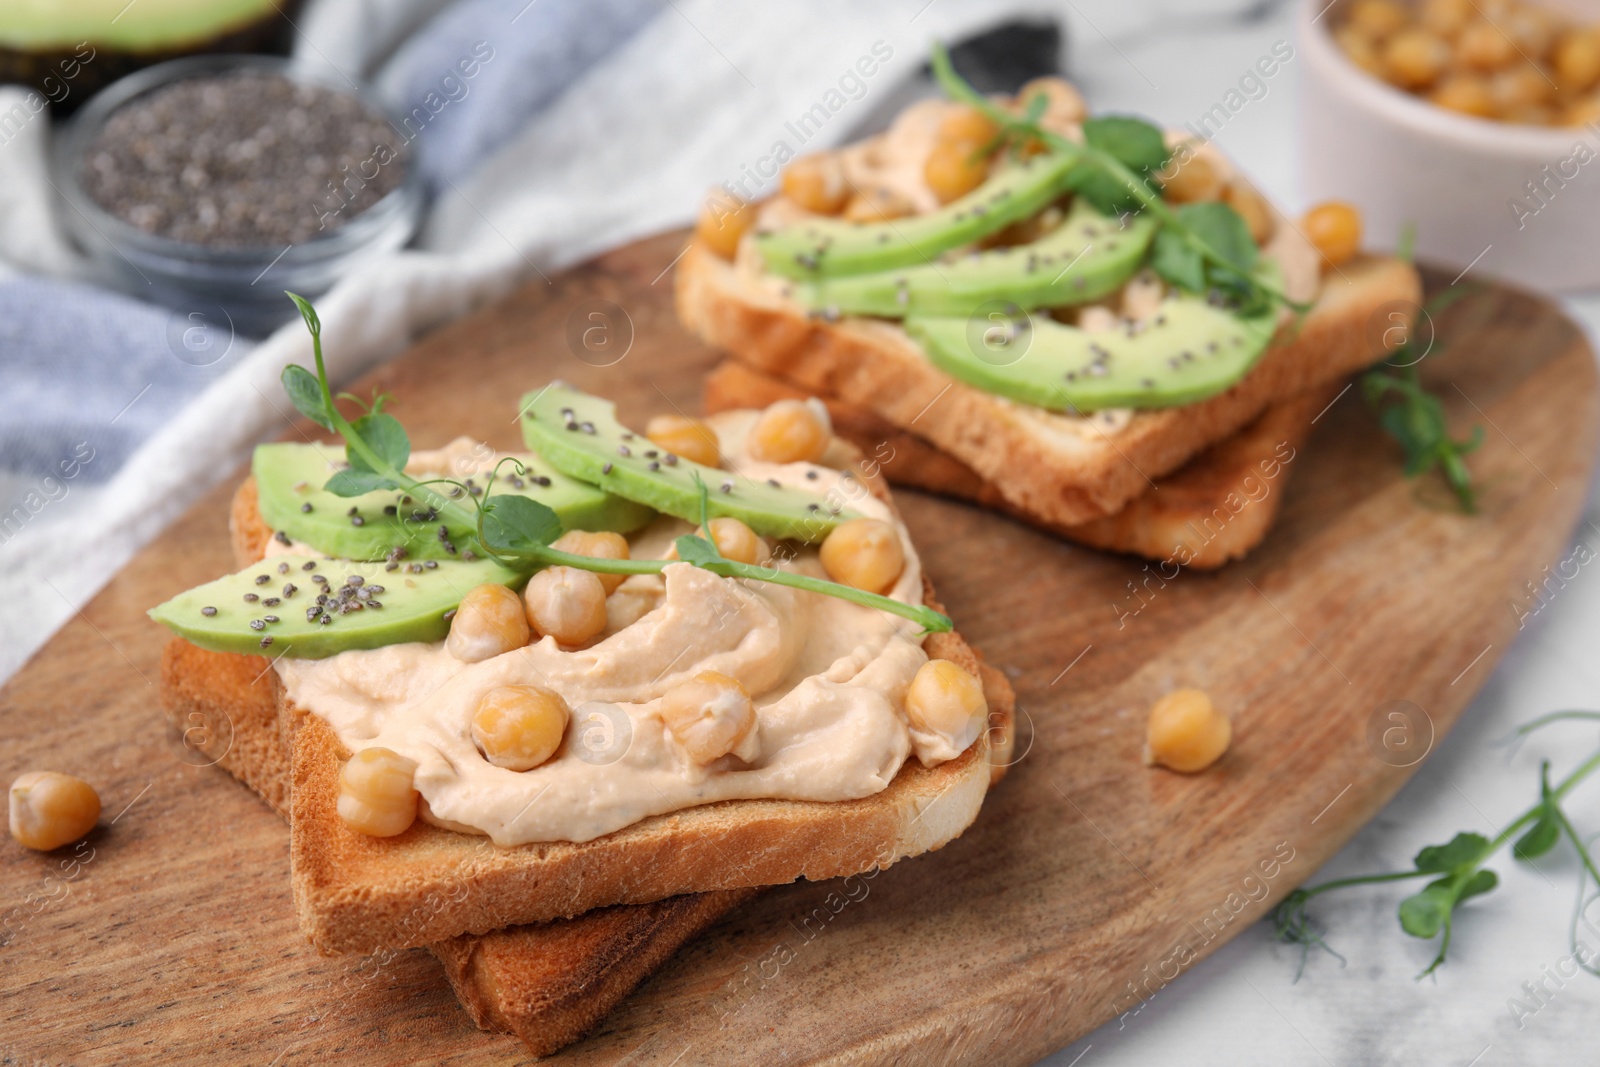 Photo of Delicious sandwiches with hummus, avocado and chickpeas on wooden board